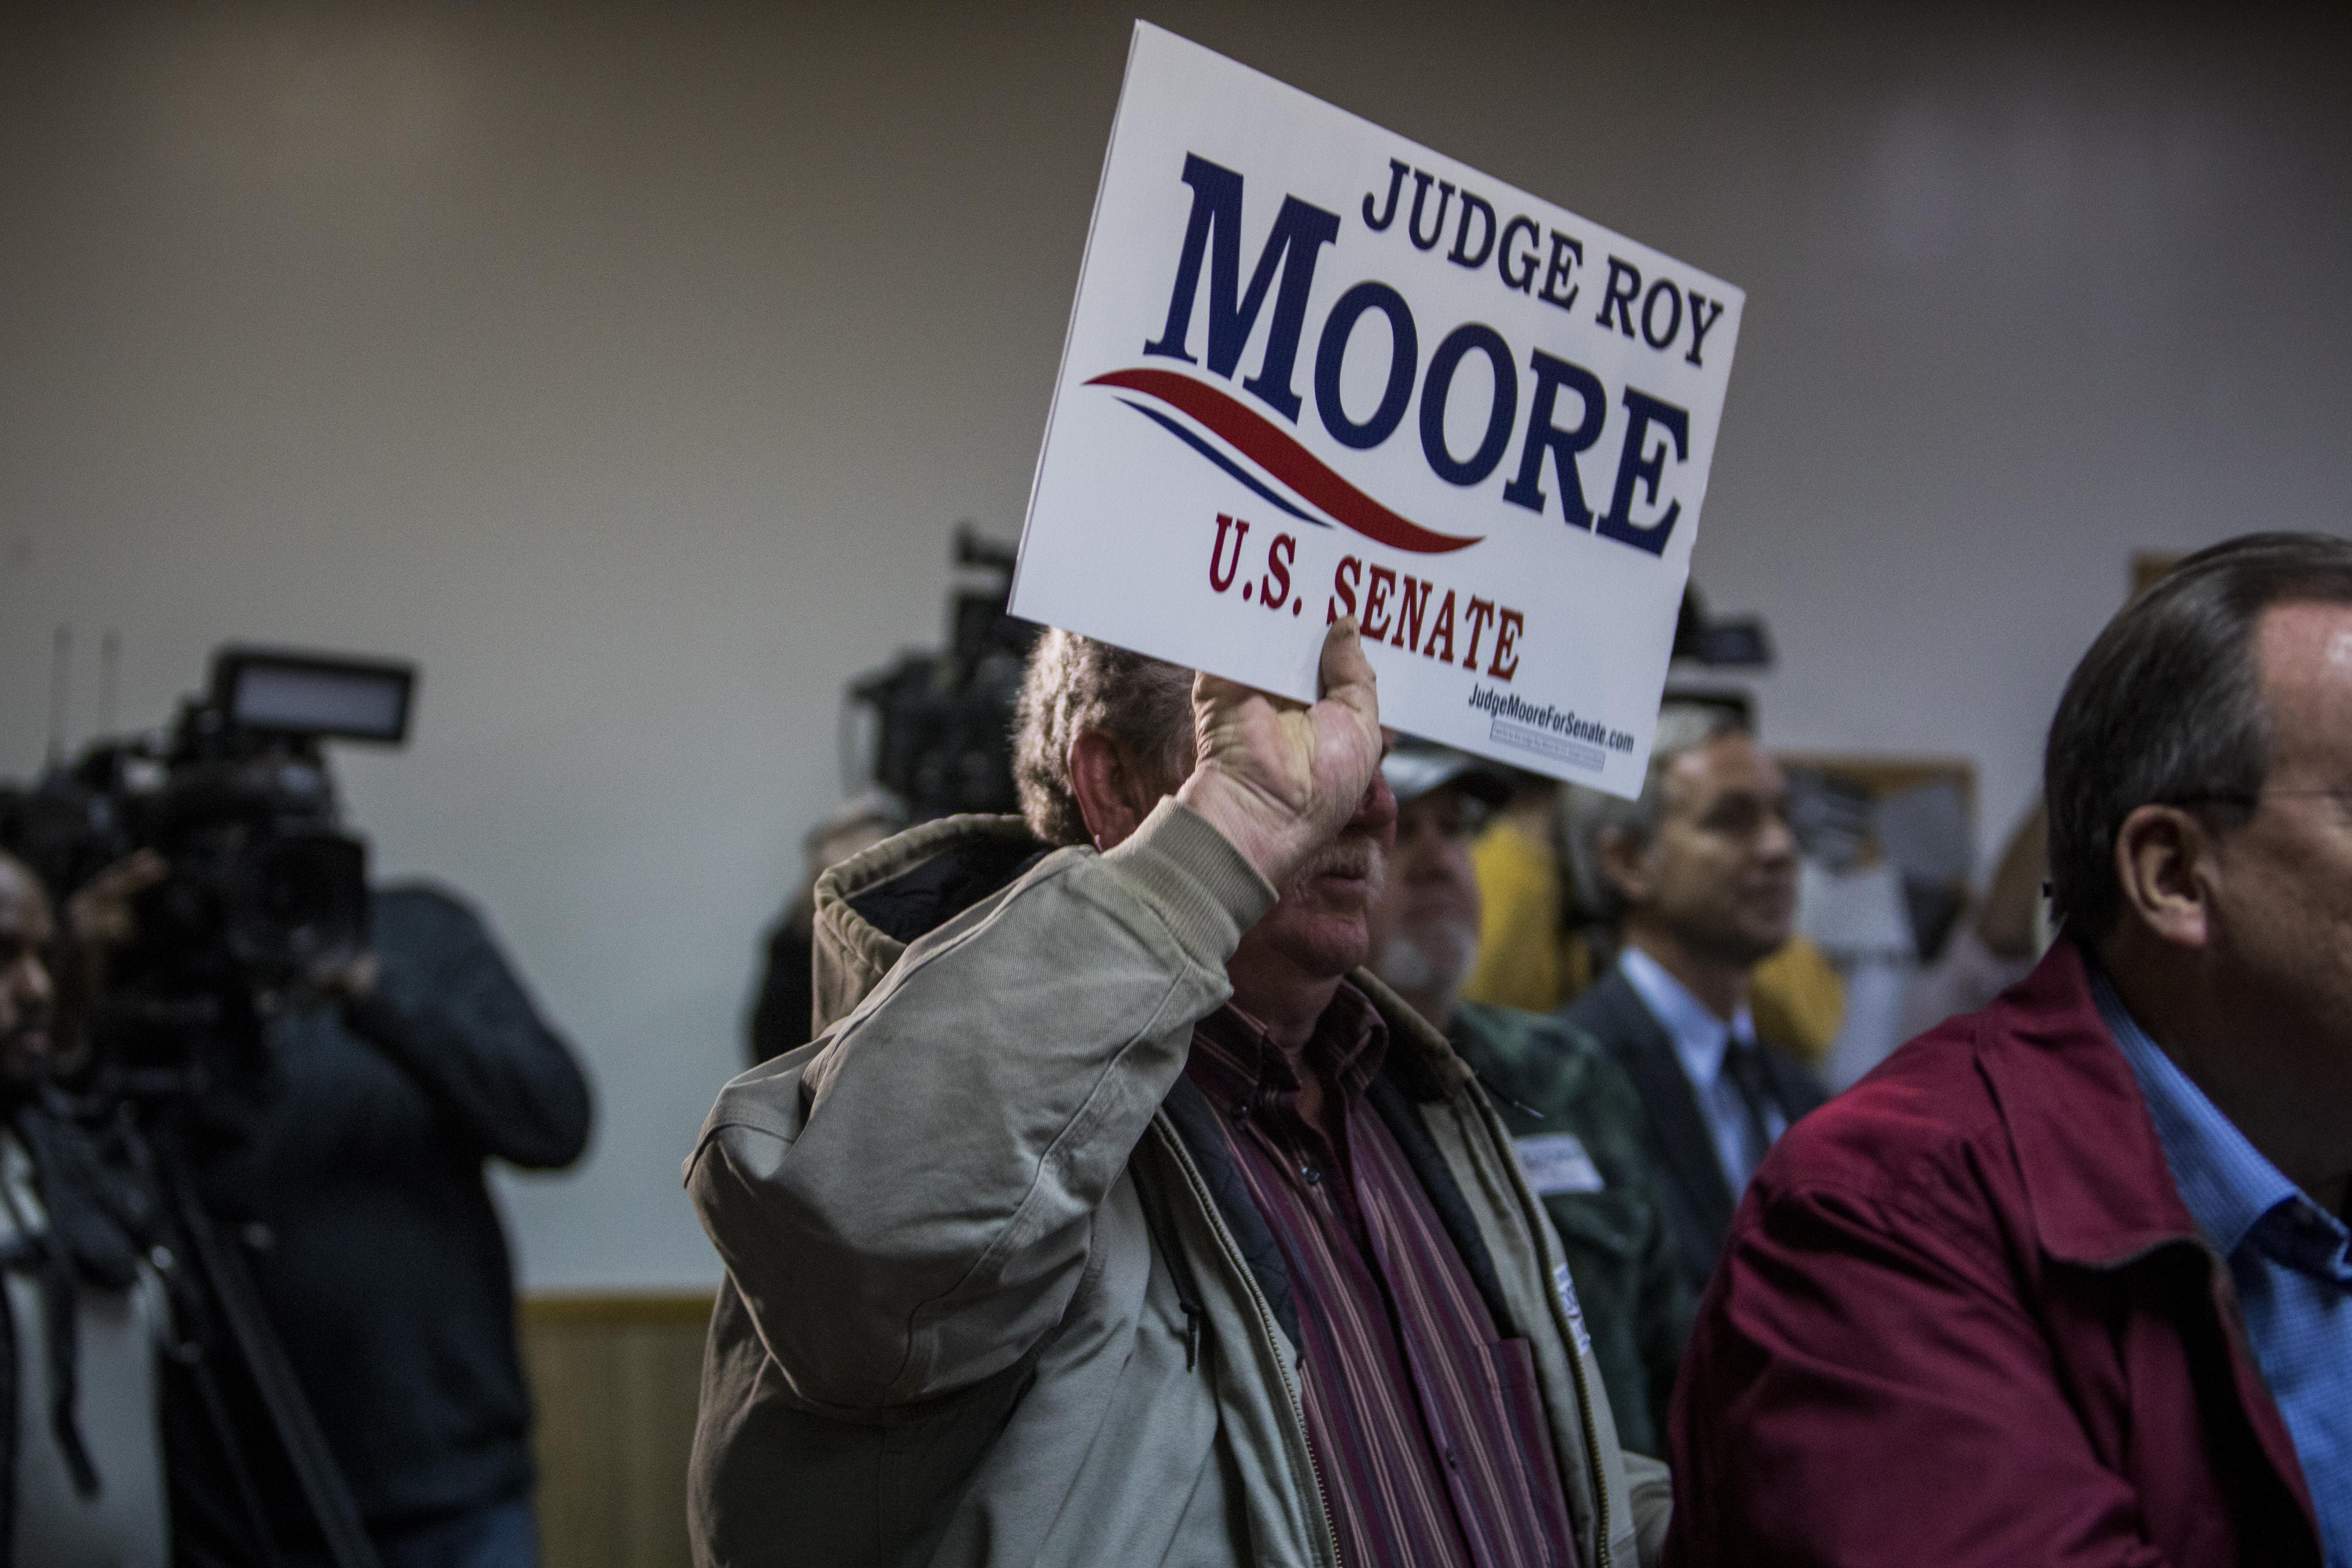 HENAGAR, AL - NOVEMBER 27: Judge Roy Moore supporters listen during a campaign rally on November 27, 2017 in Henagar, Alabama. Over 100 people turned out to the event packing the Henagar Event Center. (Photo by Joe Buglewicz/Getty Images)